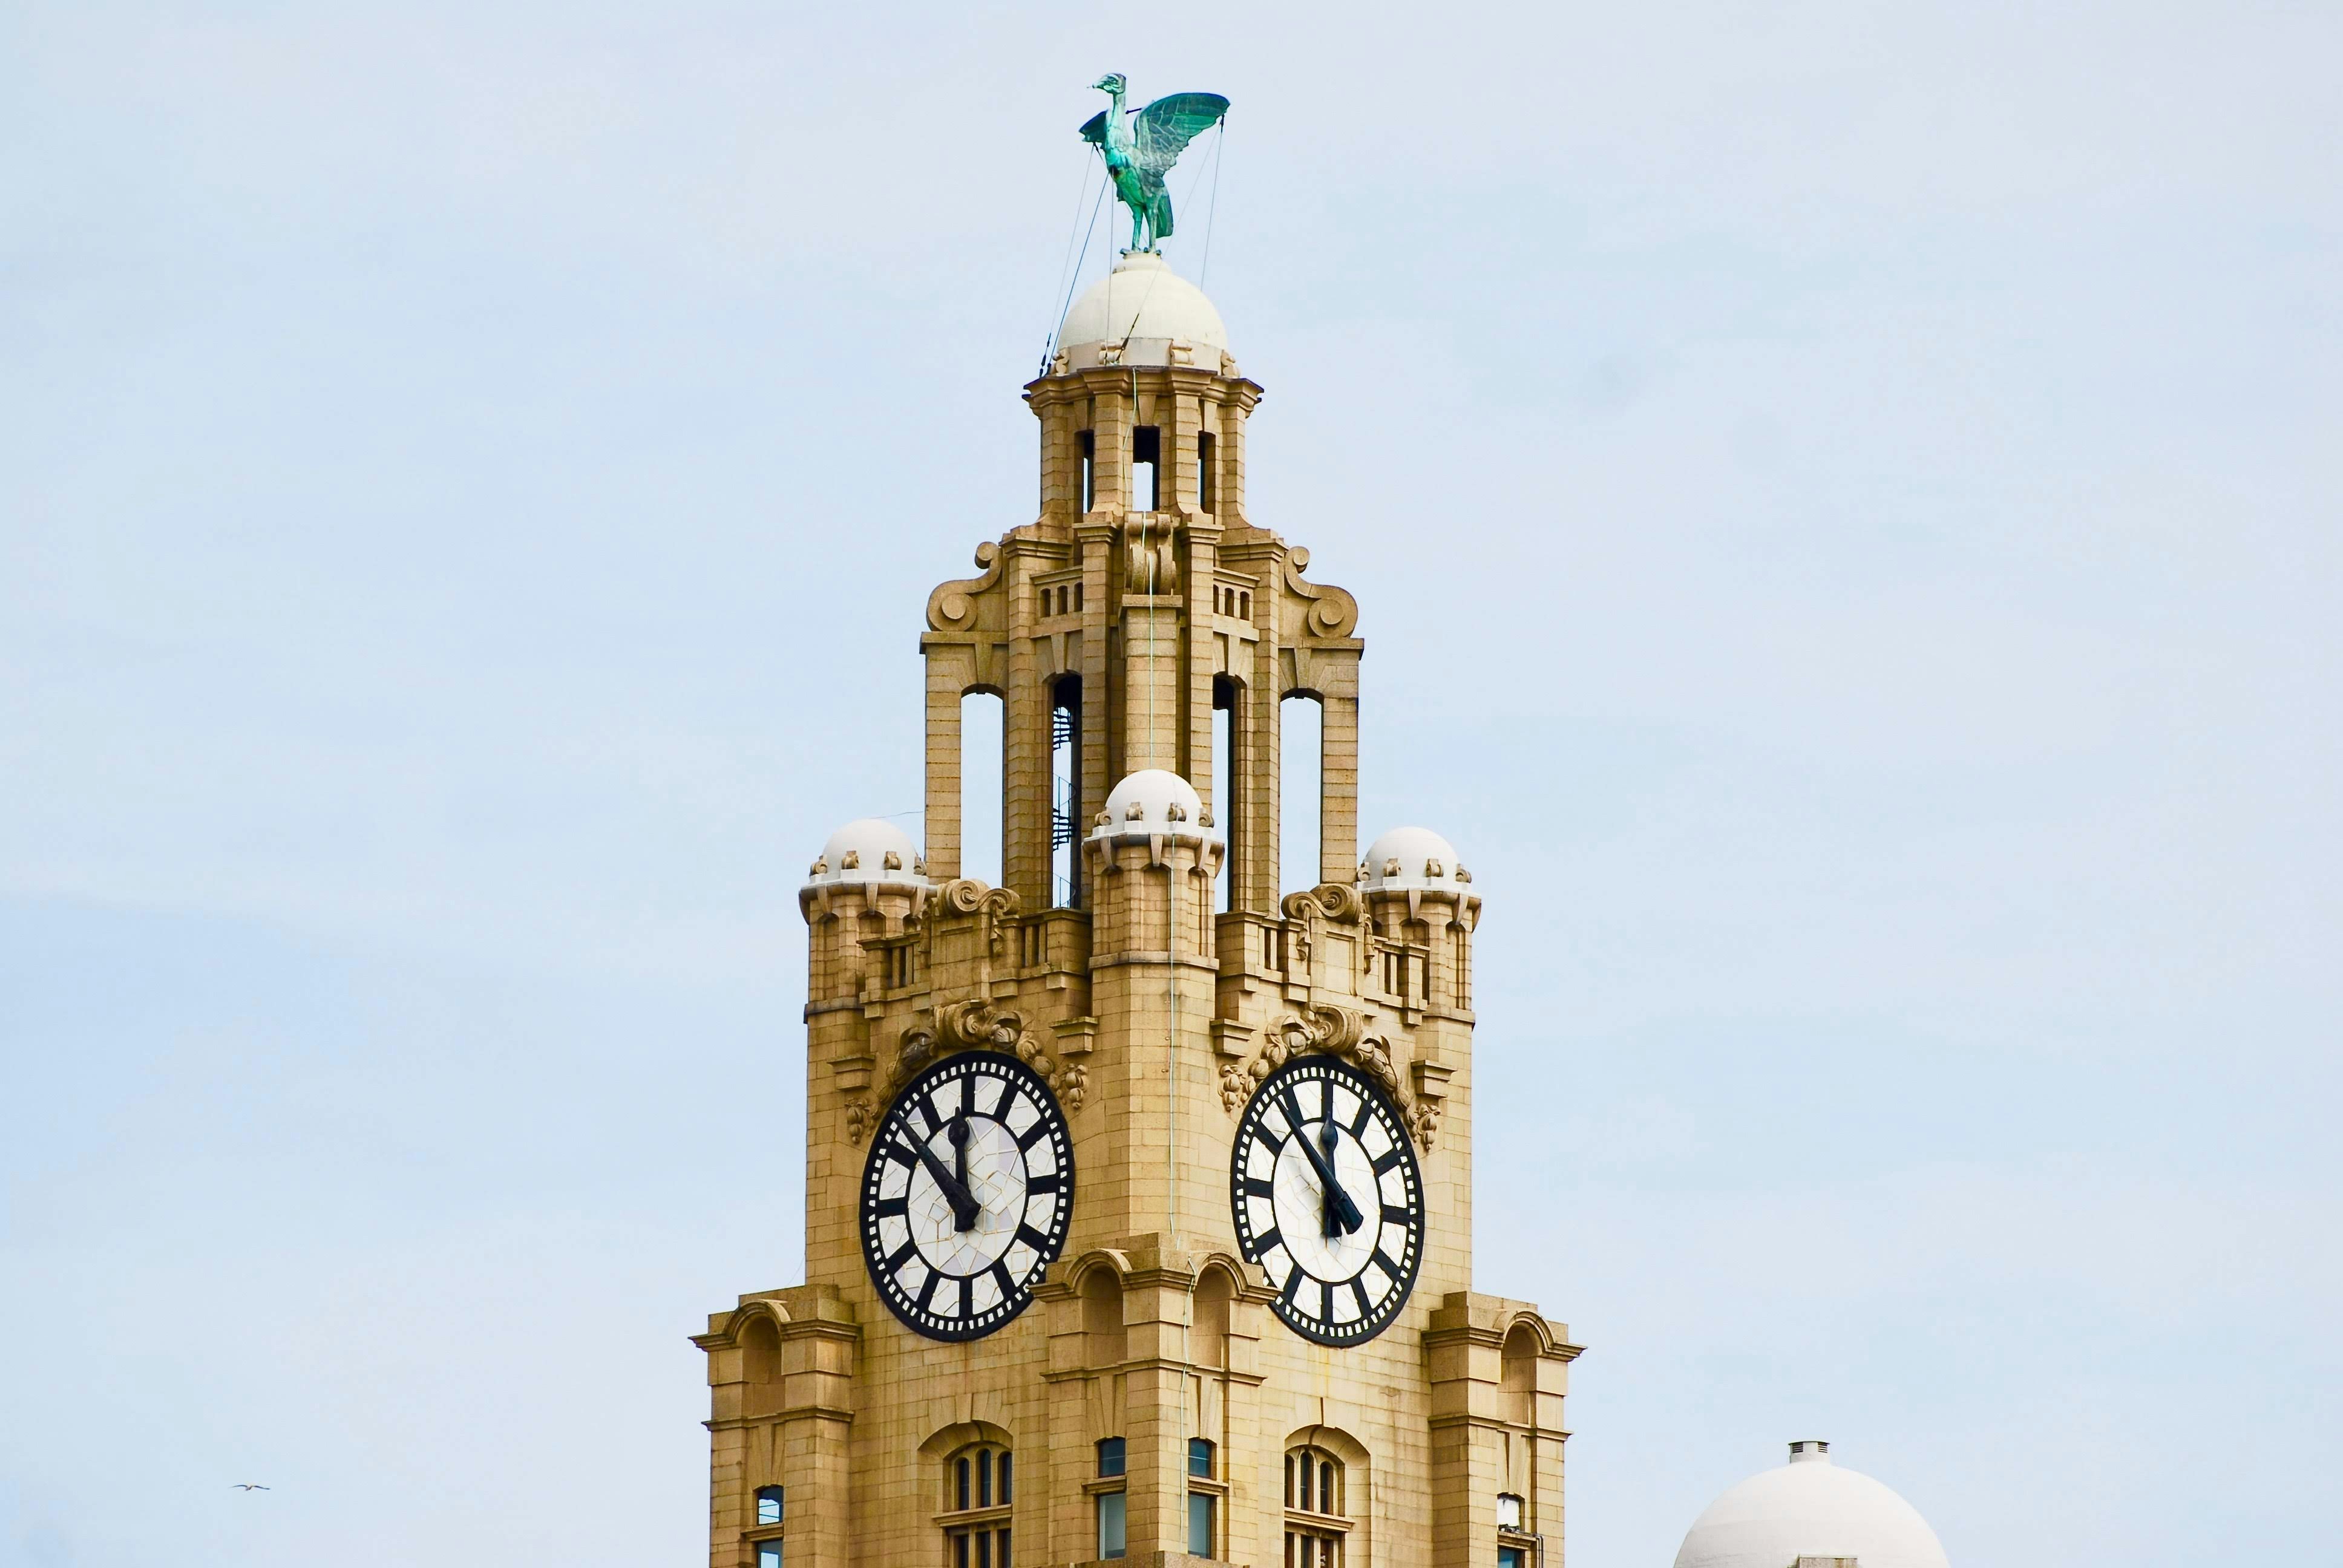 The female Liver Bird is said to look over the river Mersey looking out for sailors that are entering the port.